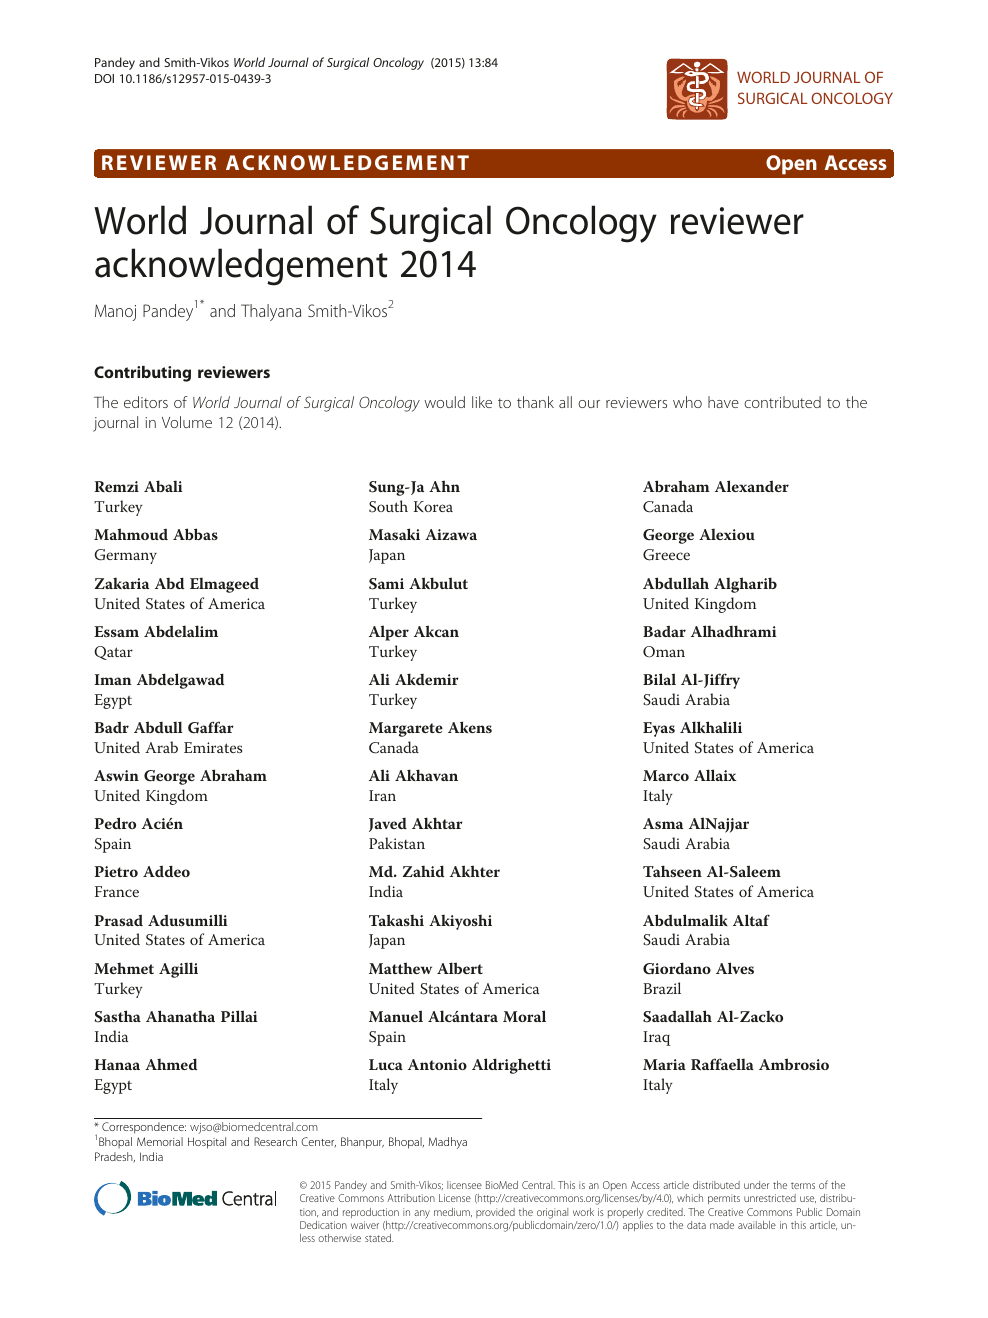 World Journal Of Surgical Oncology Reviewer Acknowledgement - 